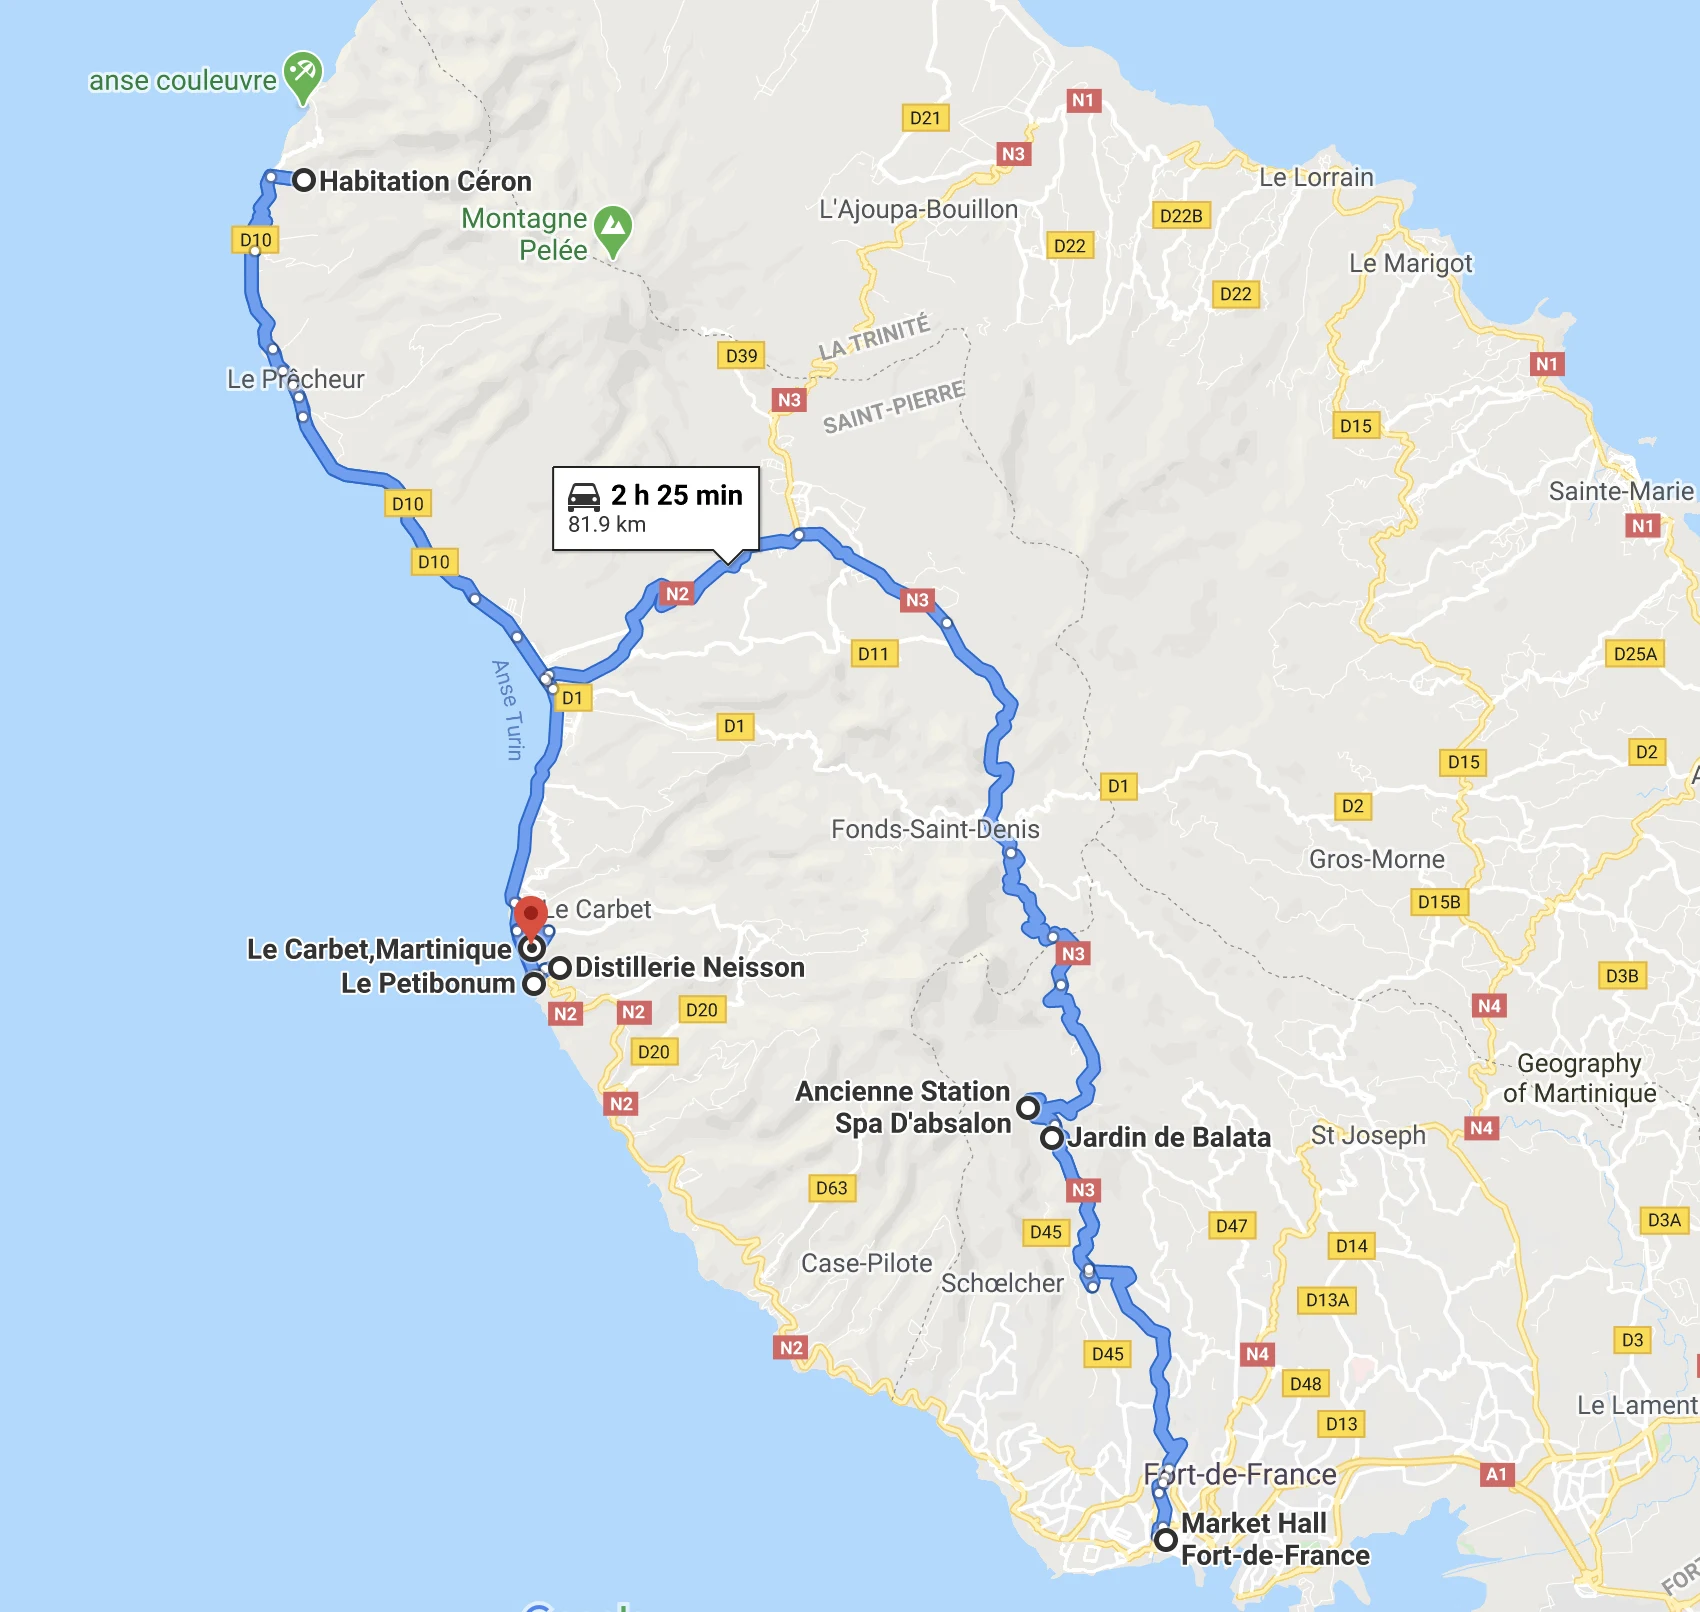 A map of the full day 1 itinerary